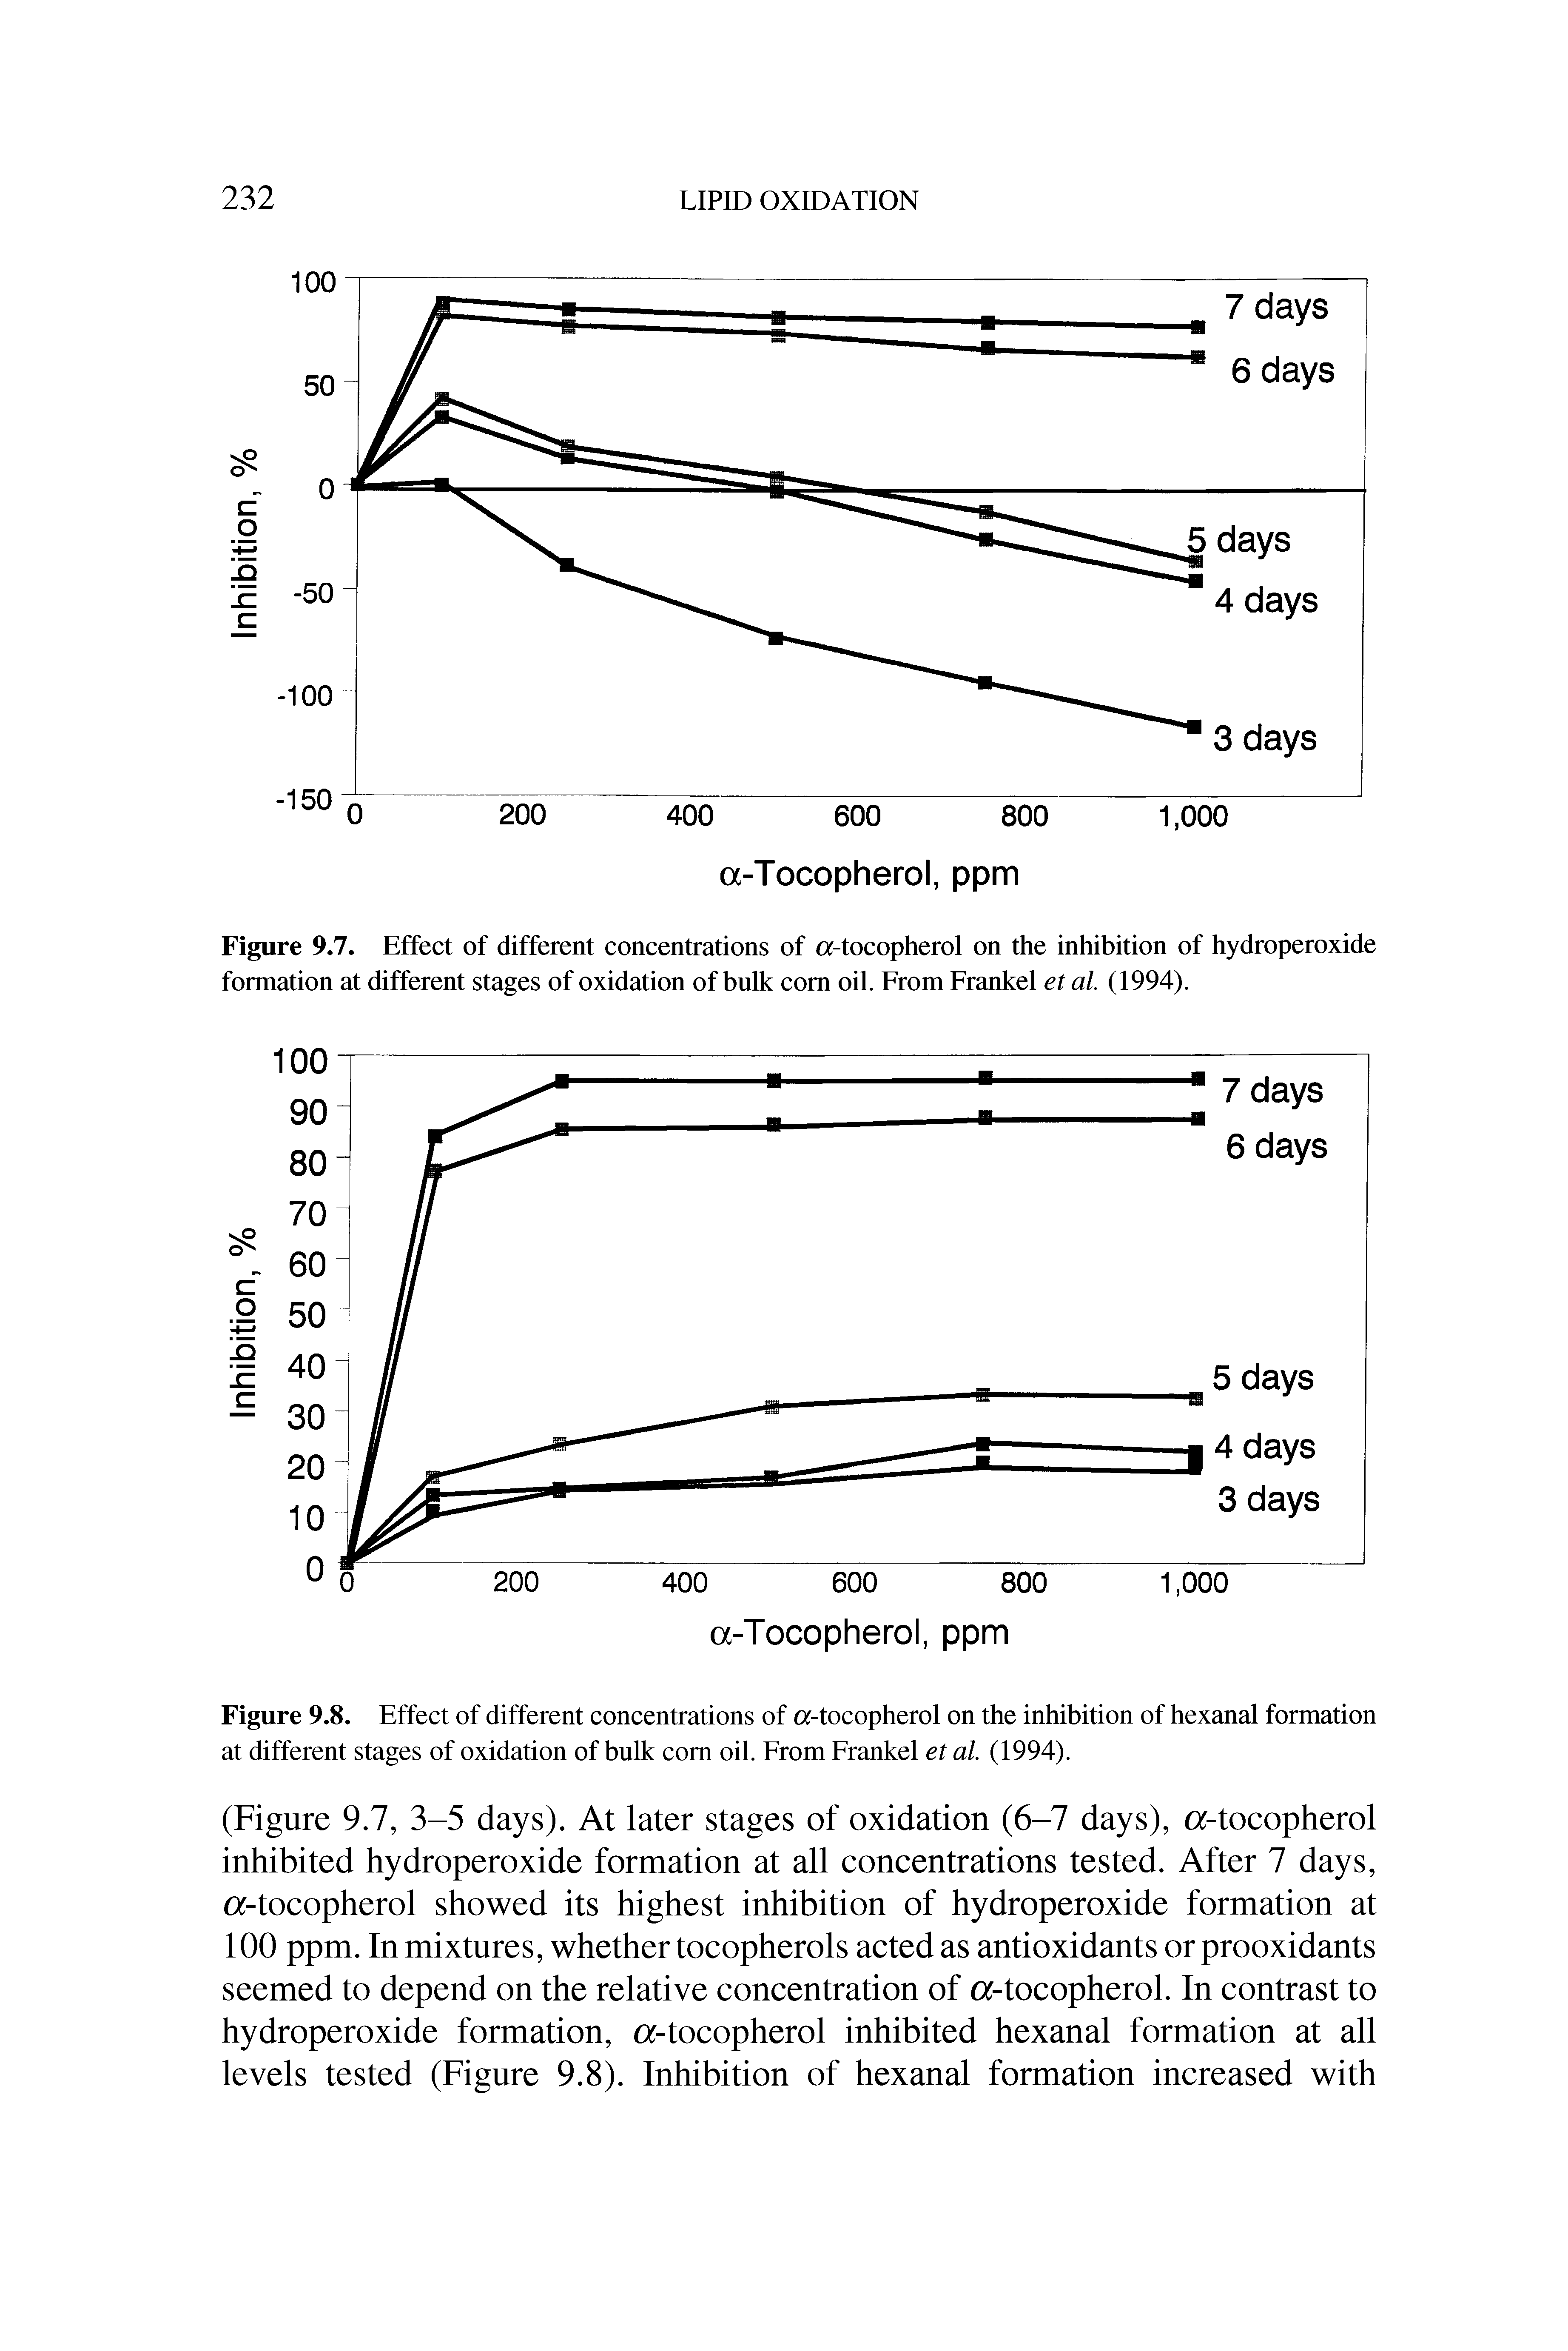 Figure 9.8. Effect of different concentrations of a-tocopherol on the inhibition of hexanal formation at different stages of oxidation of bulk com oil. From Frankel et al (1994).